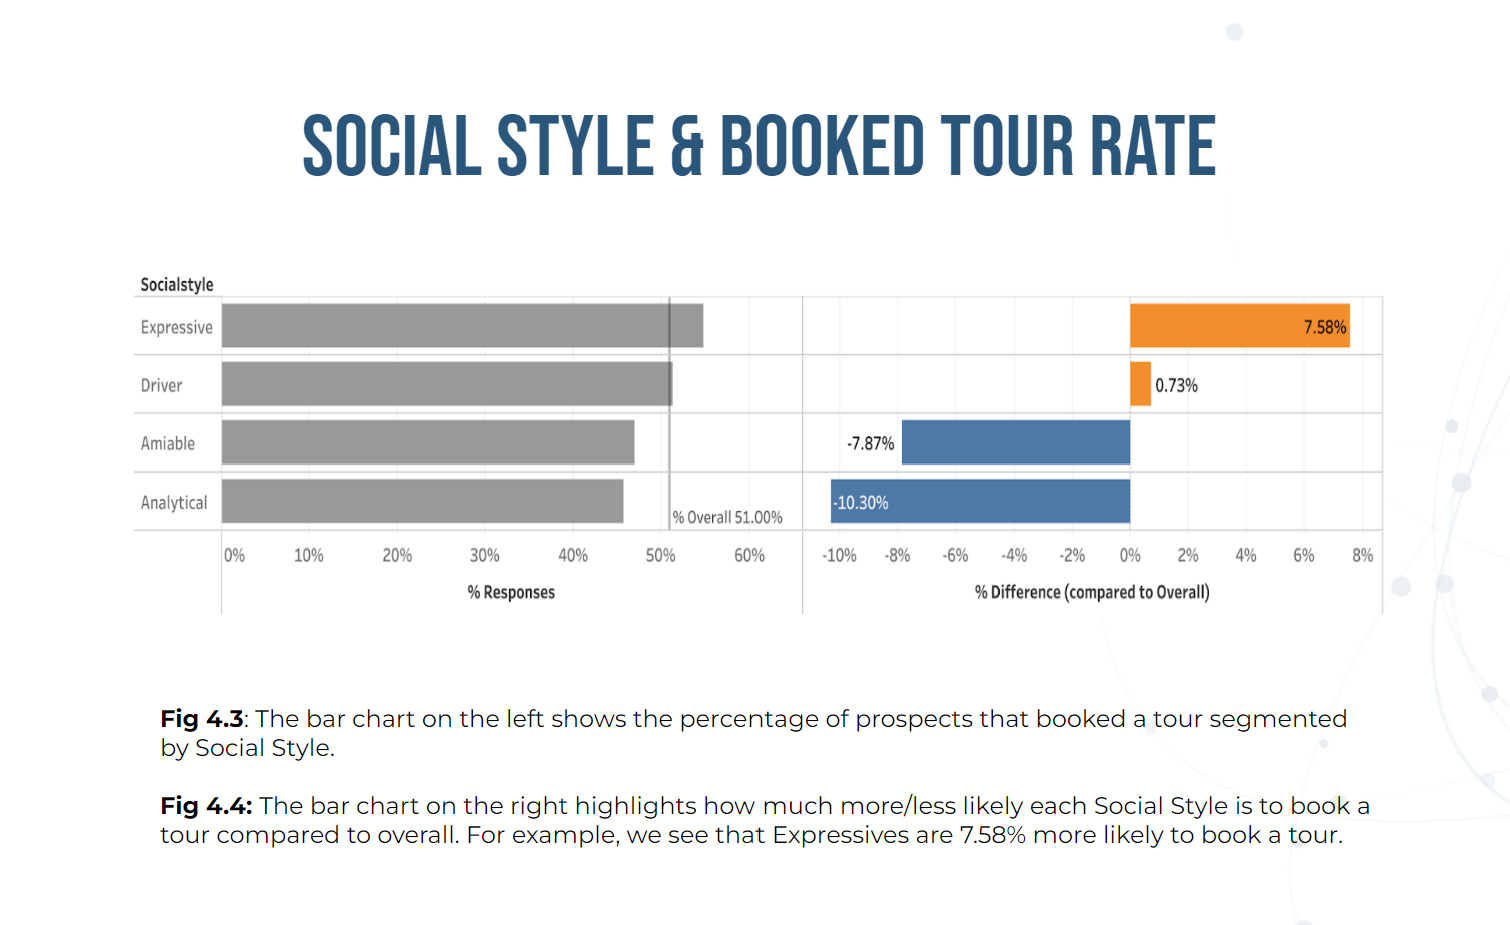 Chart to demonstrate how "Social Style" impacts tour rate